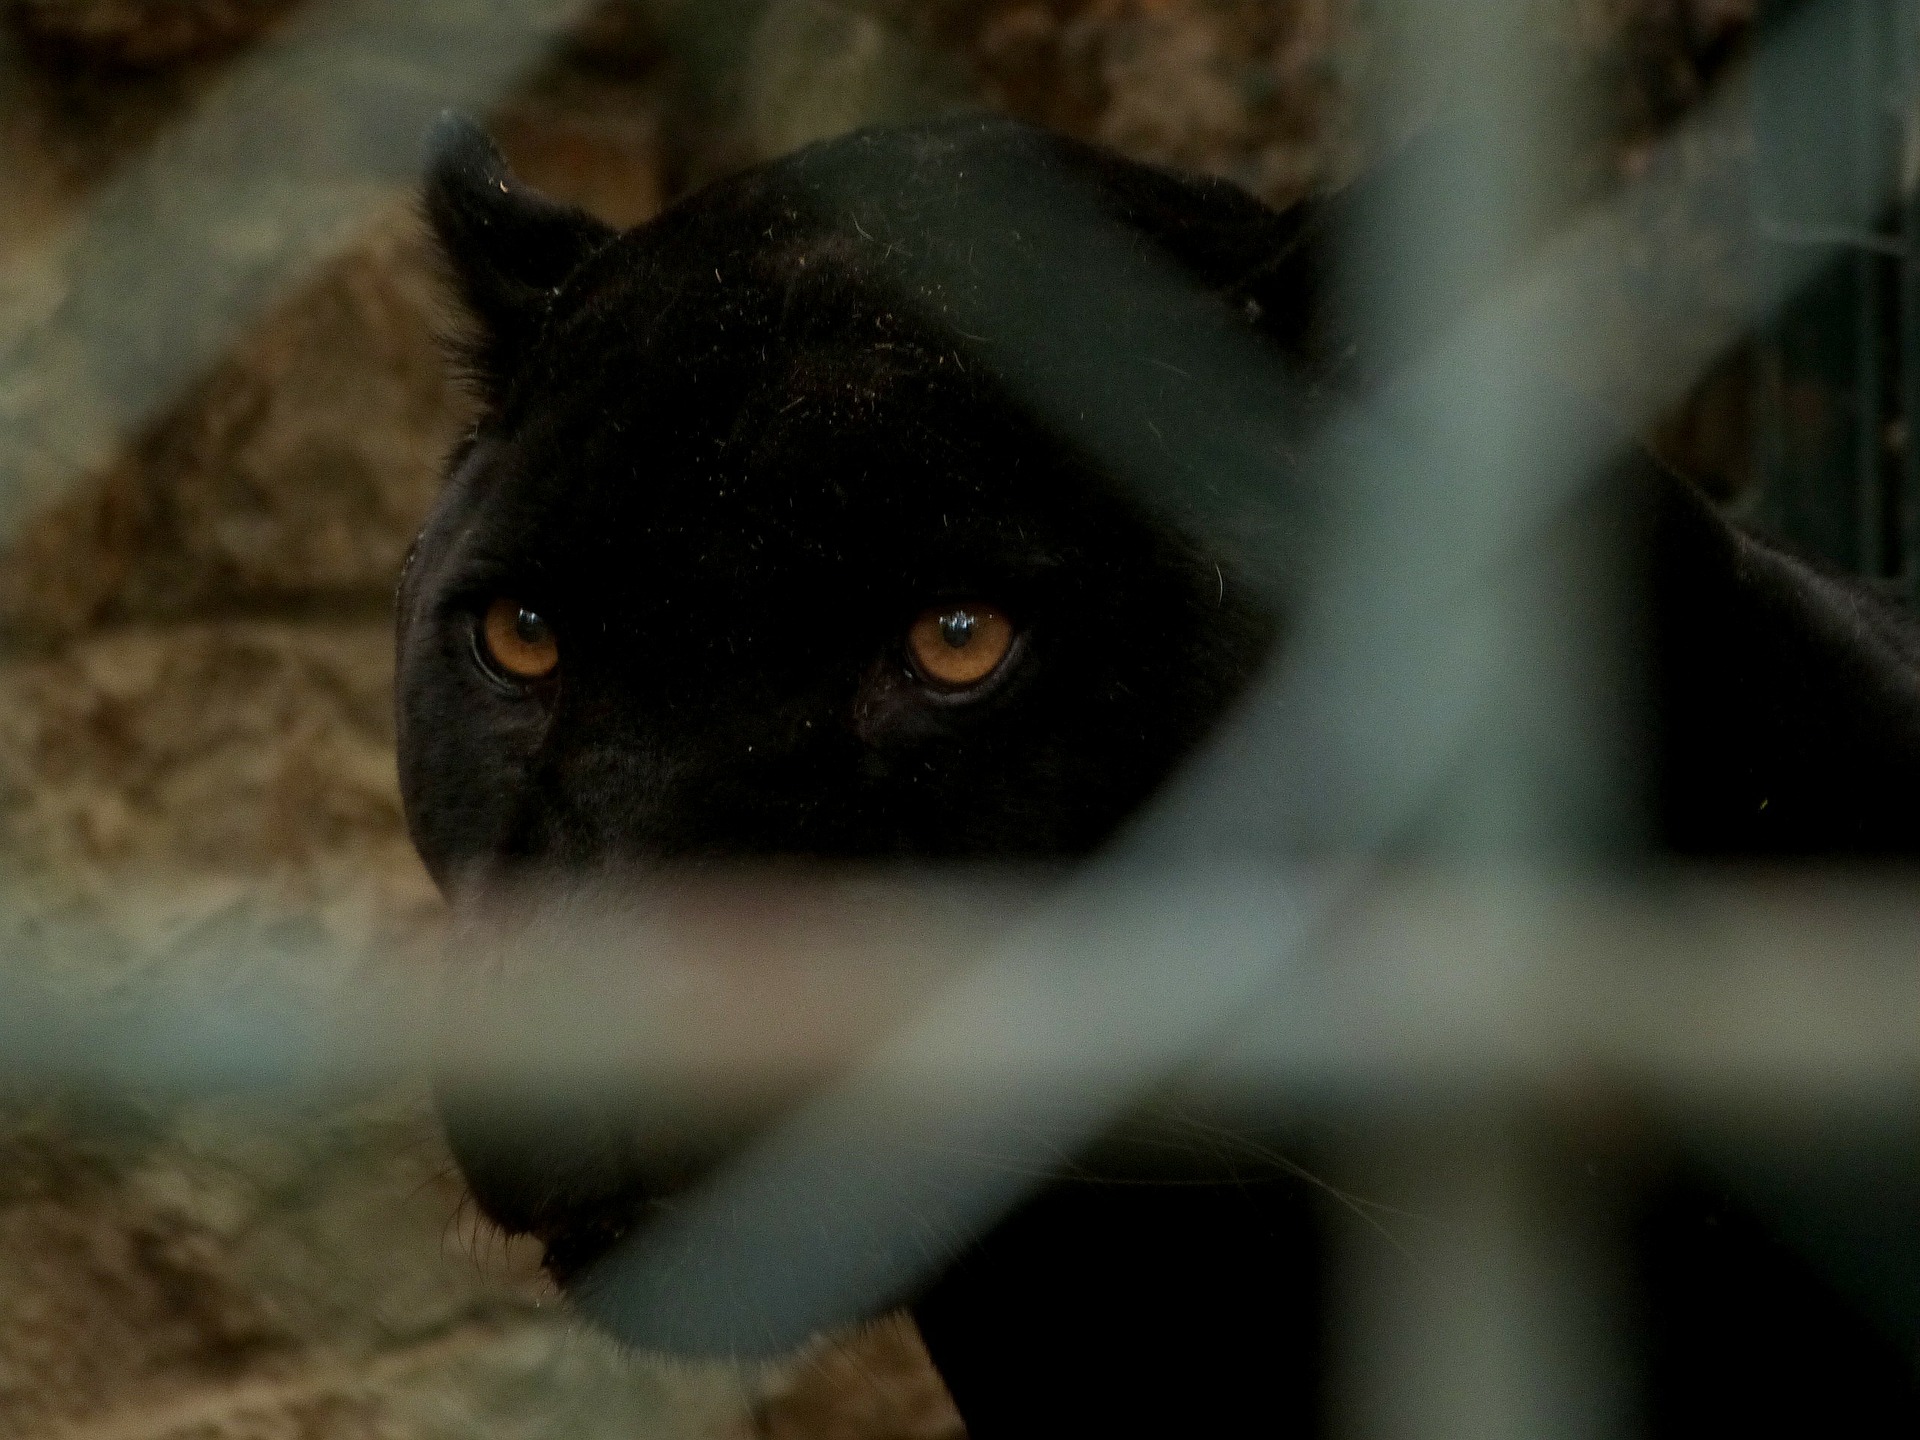 Black Panther Seen Again, This Time in Kecskemét - Hungary Today